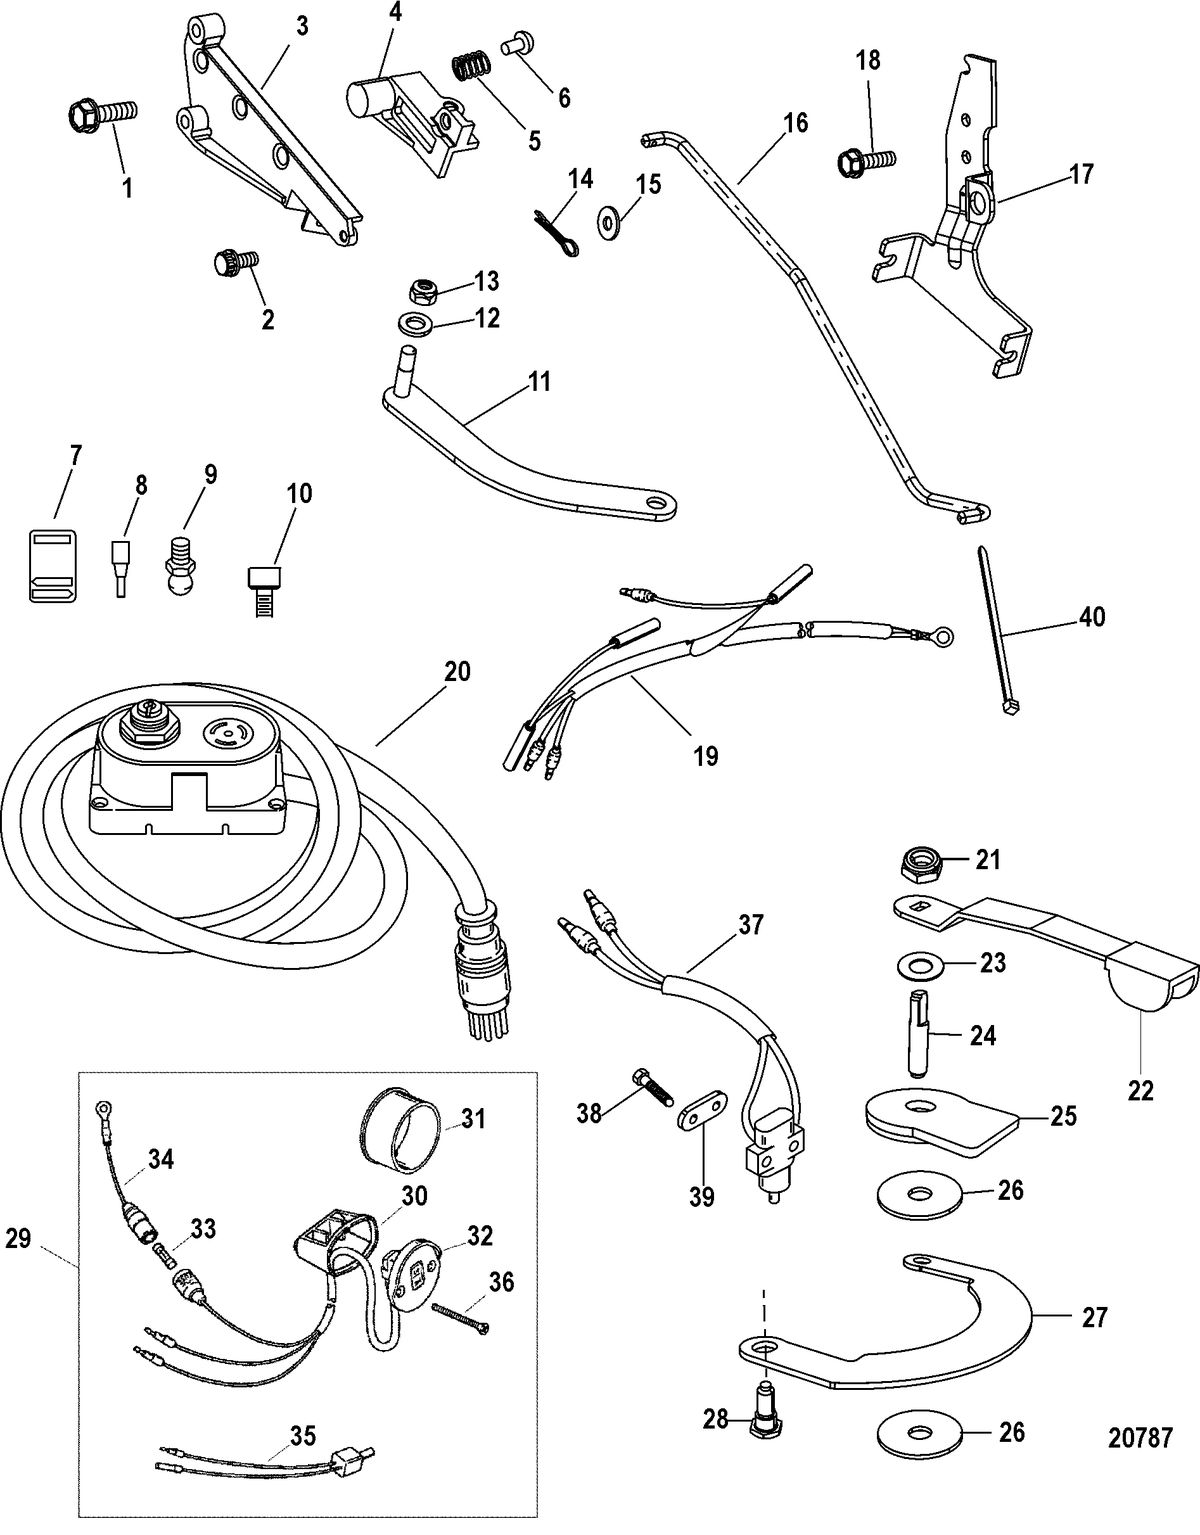 ACCESSORIES STEERING SYSTEMS AND COMPONENTS Tiller Handle Kit Components(880095A2 /A05)